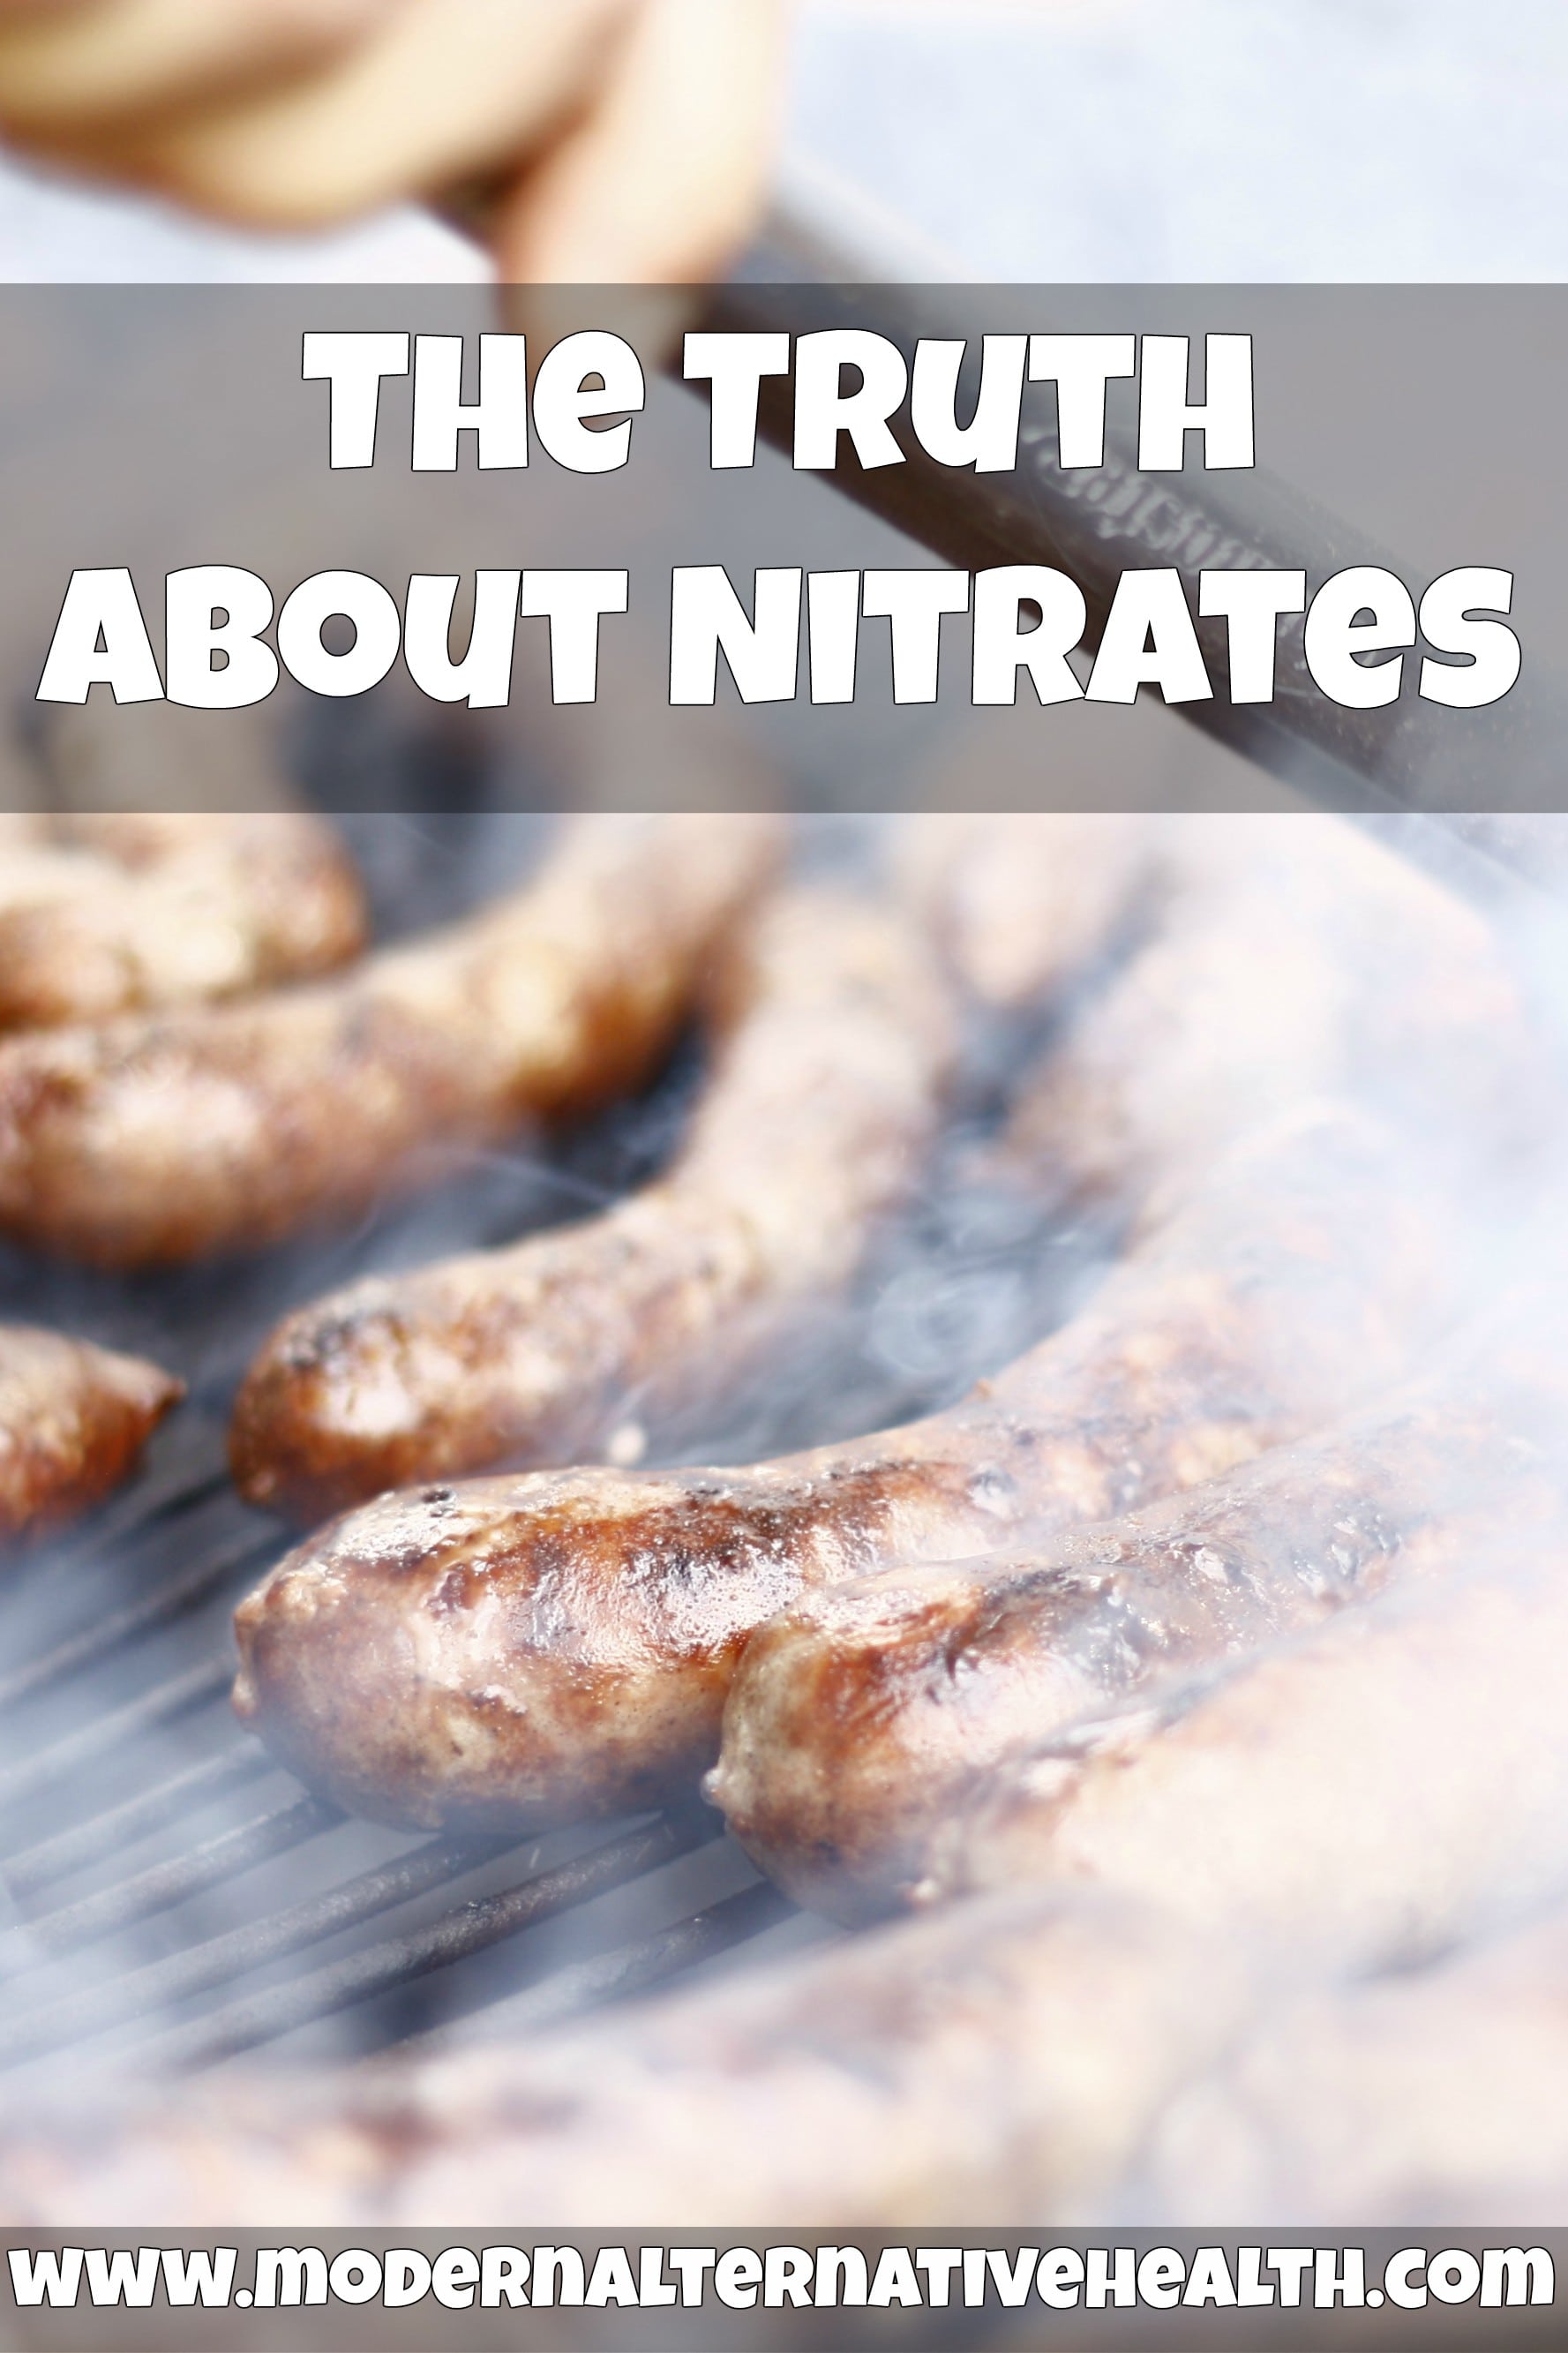 The Truth About Nitrates